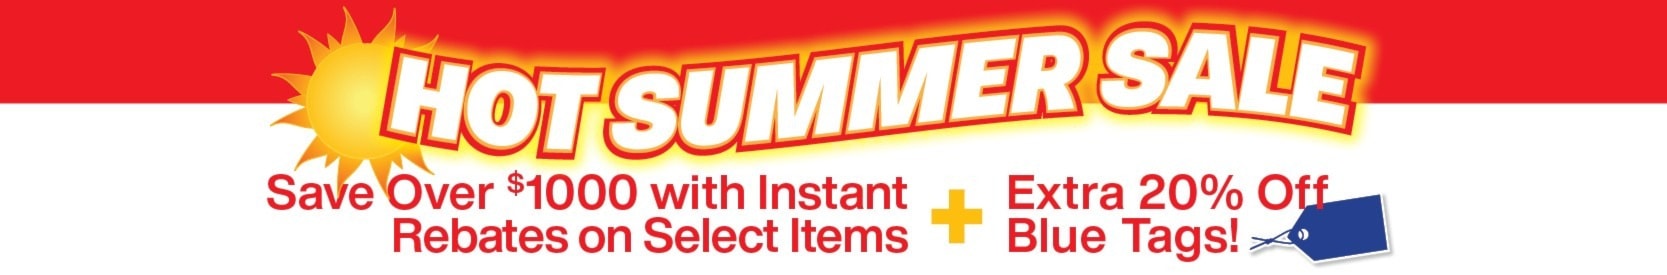 hot summer sale, save over $1000 with instant rebates on select items and an extra 20% off blue tags!